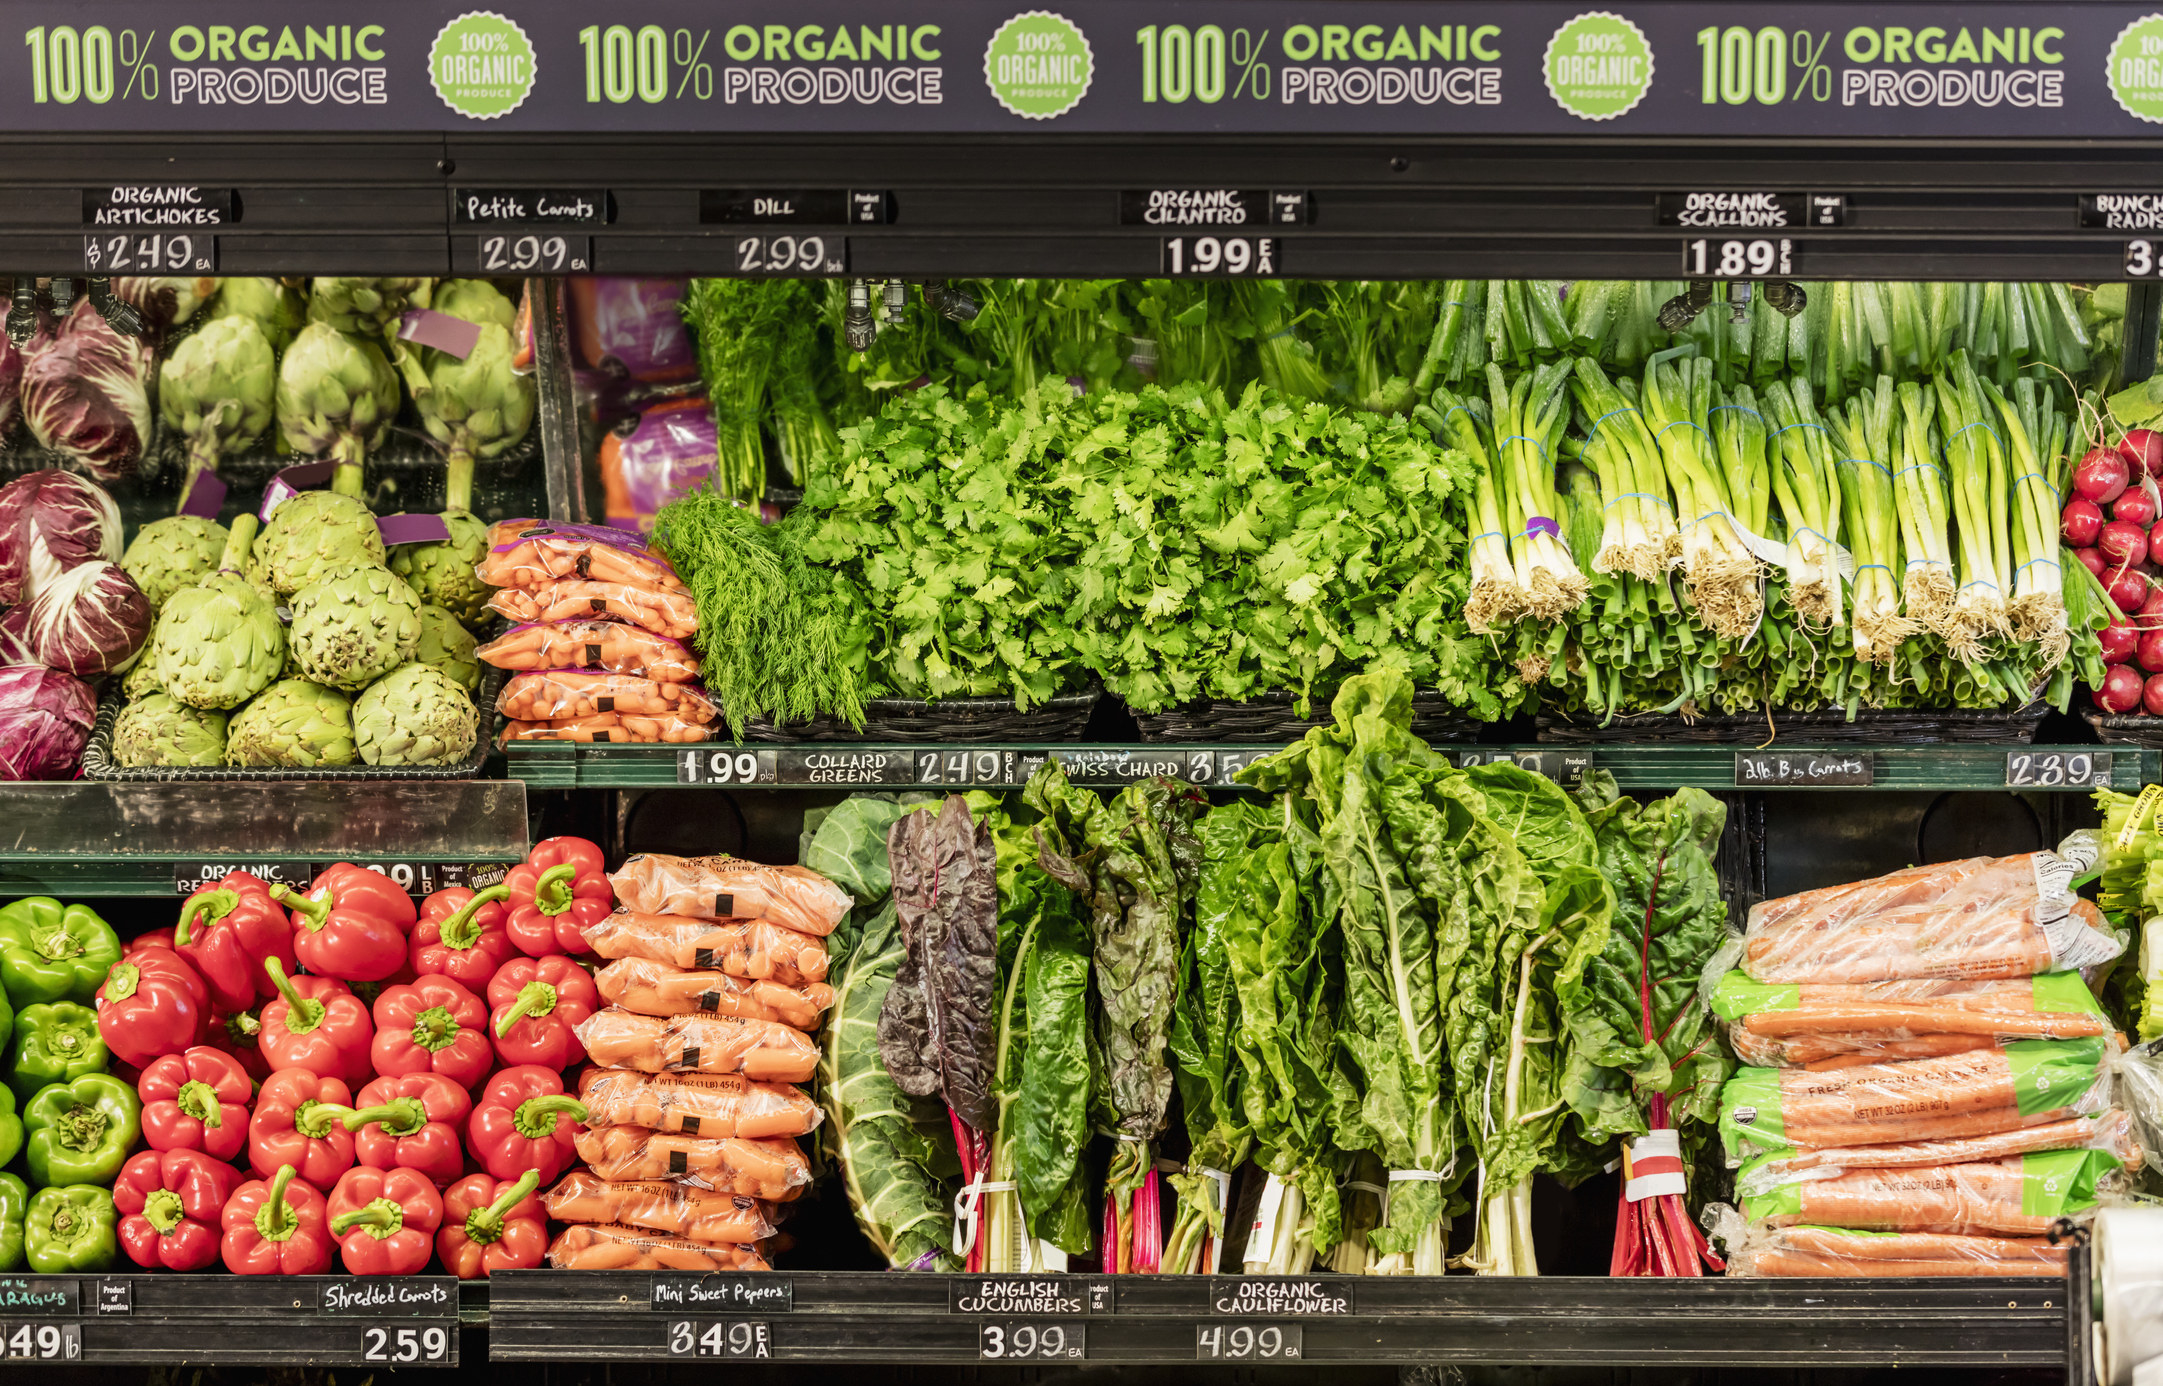 Organic vegetables in the produce aisle of a supermarket